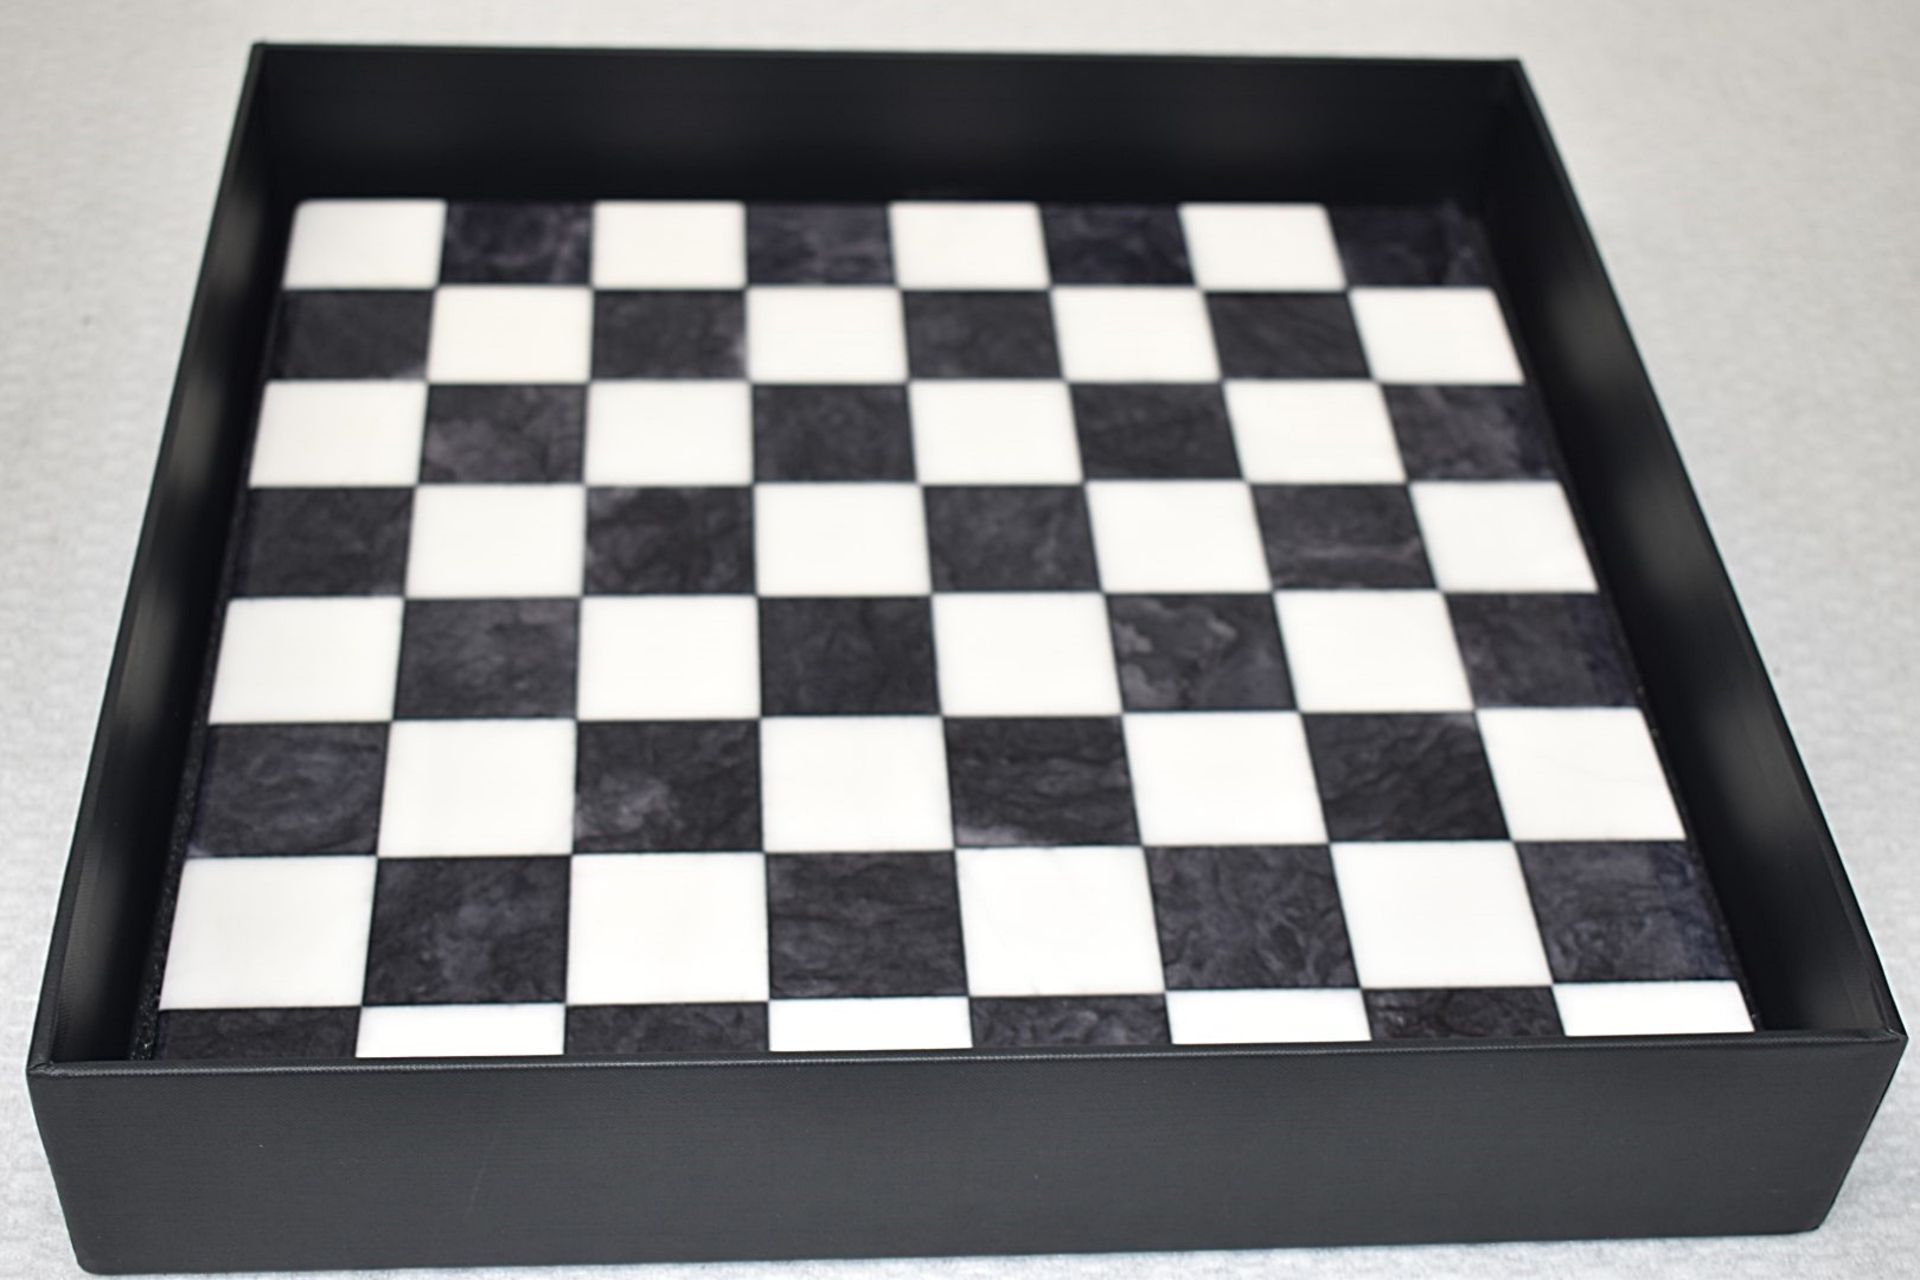 1 x PURLING Luxury Italian Chess Set In Black And White Alabaster Stone - Original Price £950.00 * - Image 6 of 15